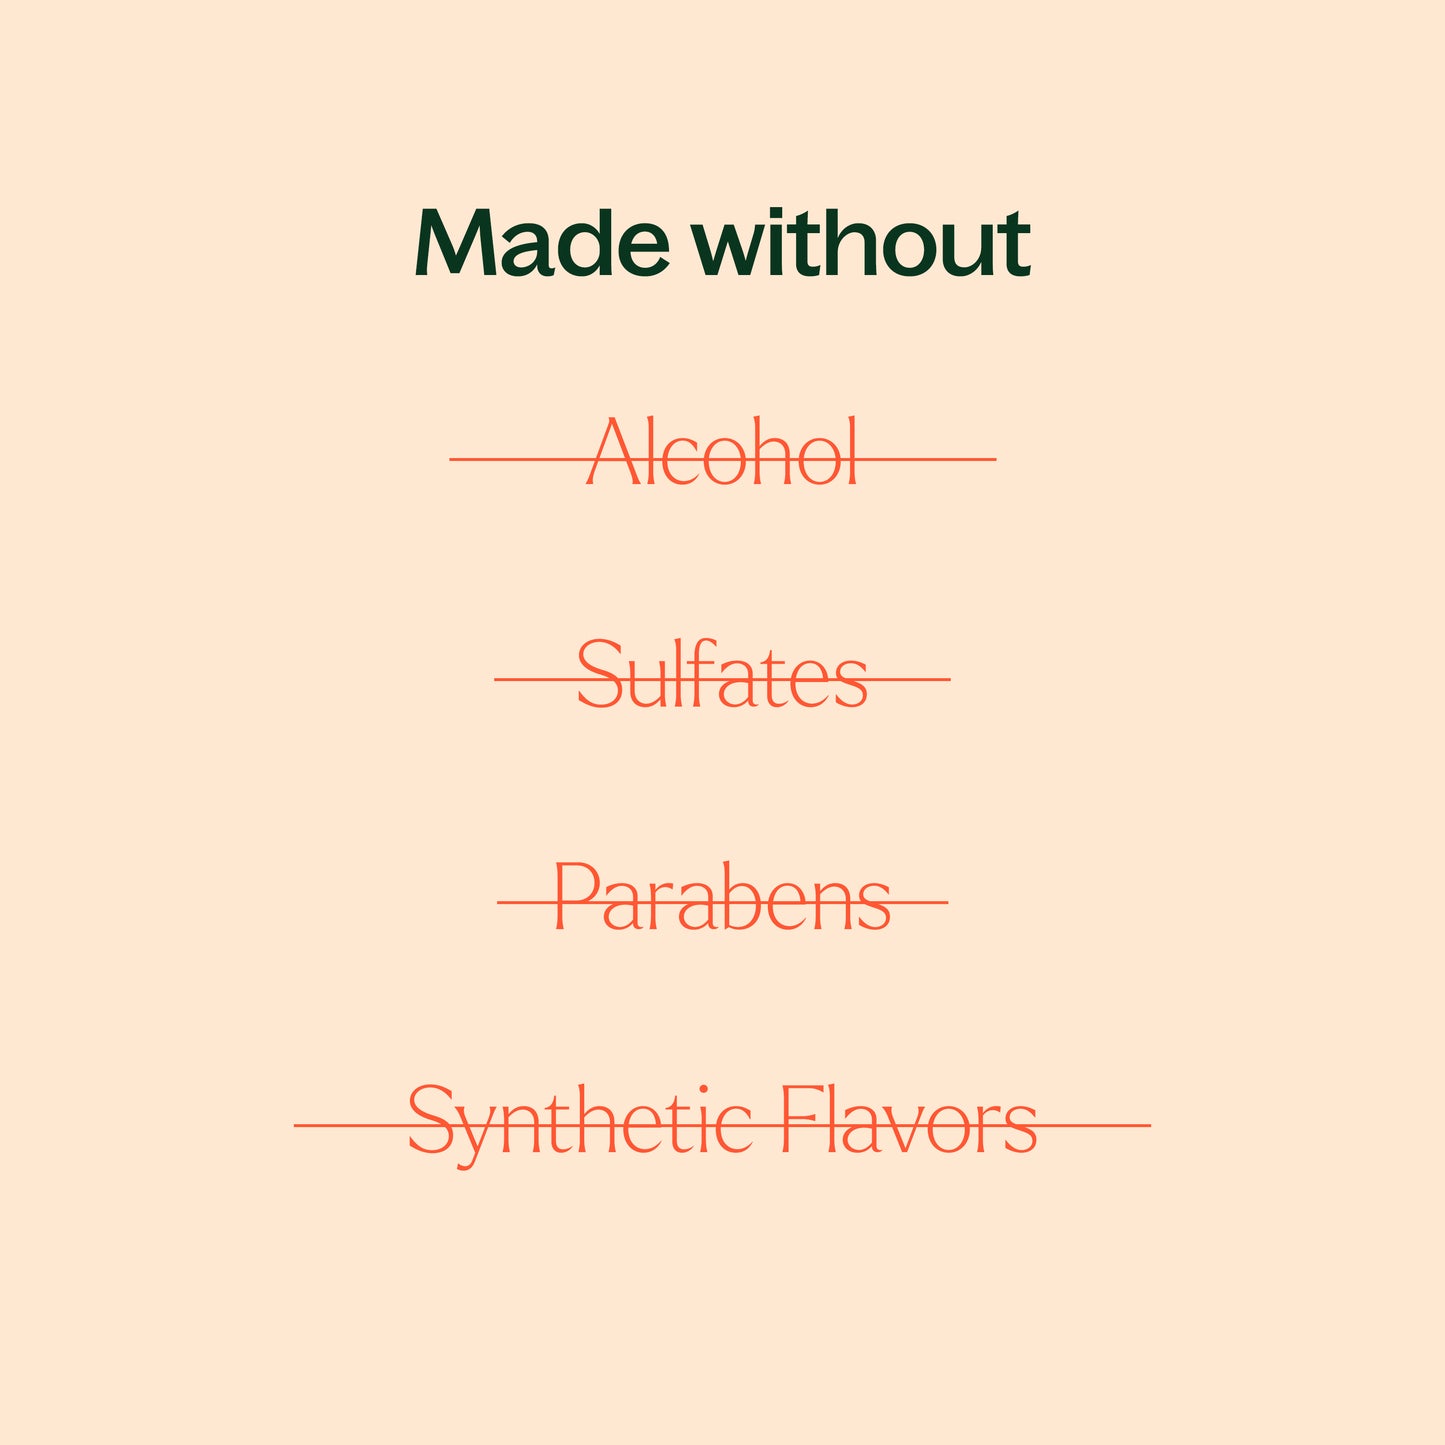 made without alcohol, sulfates, parabens, synthetic flavors